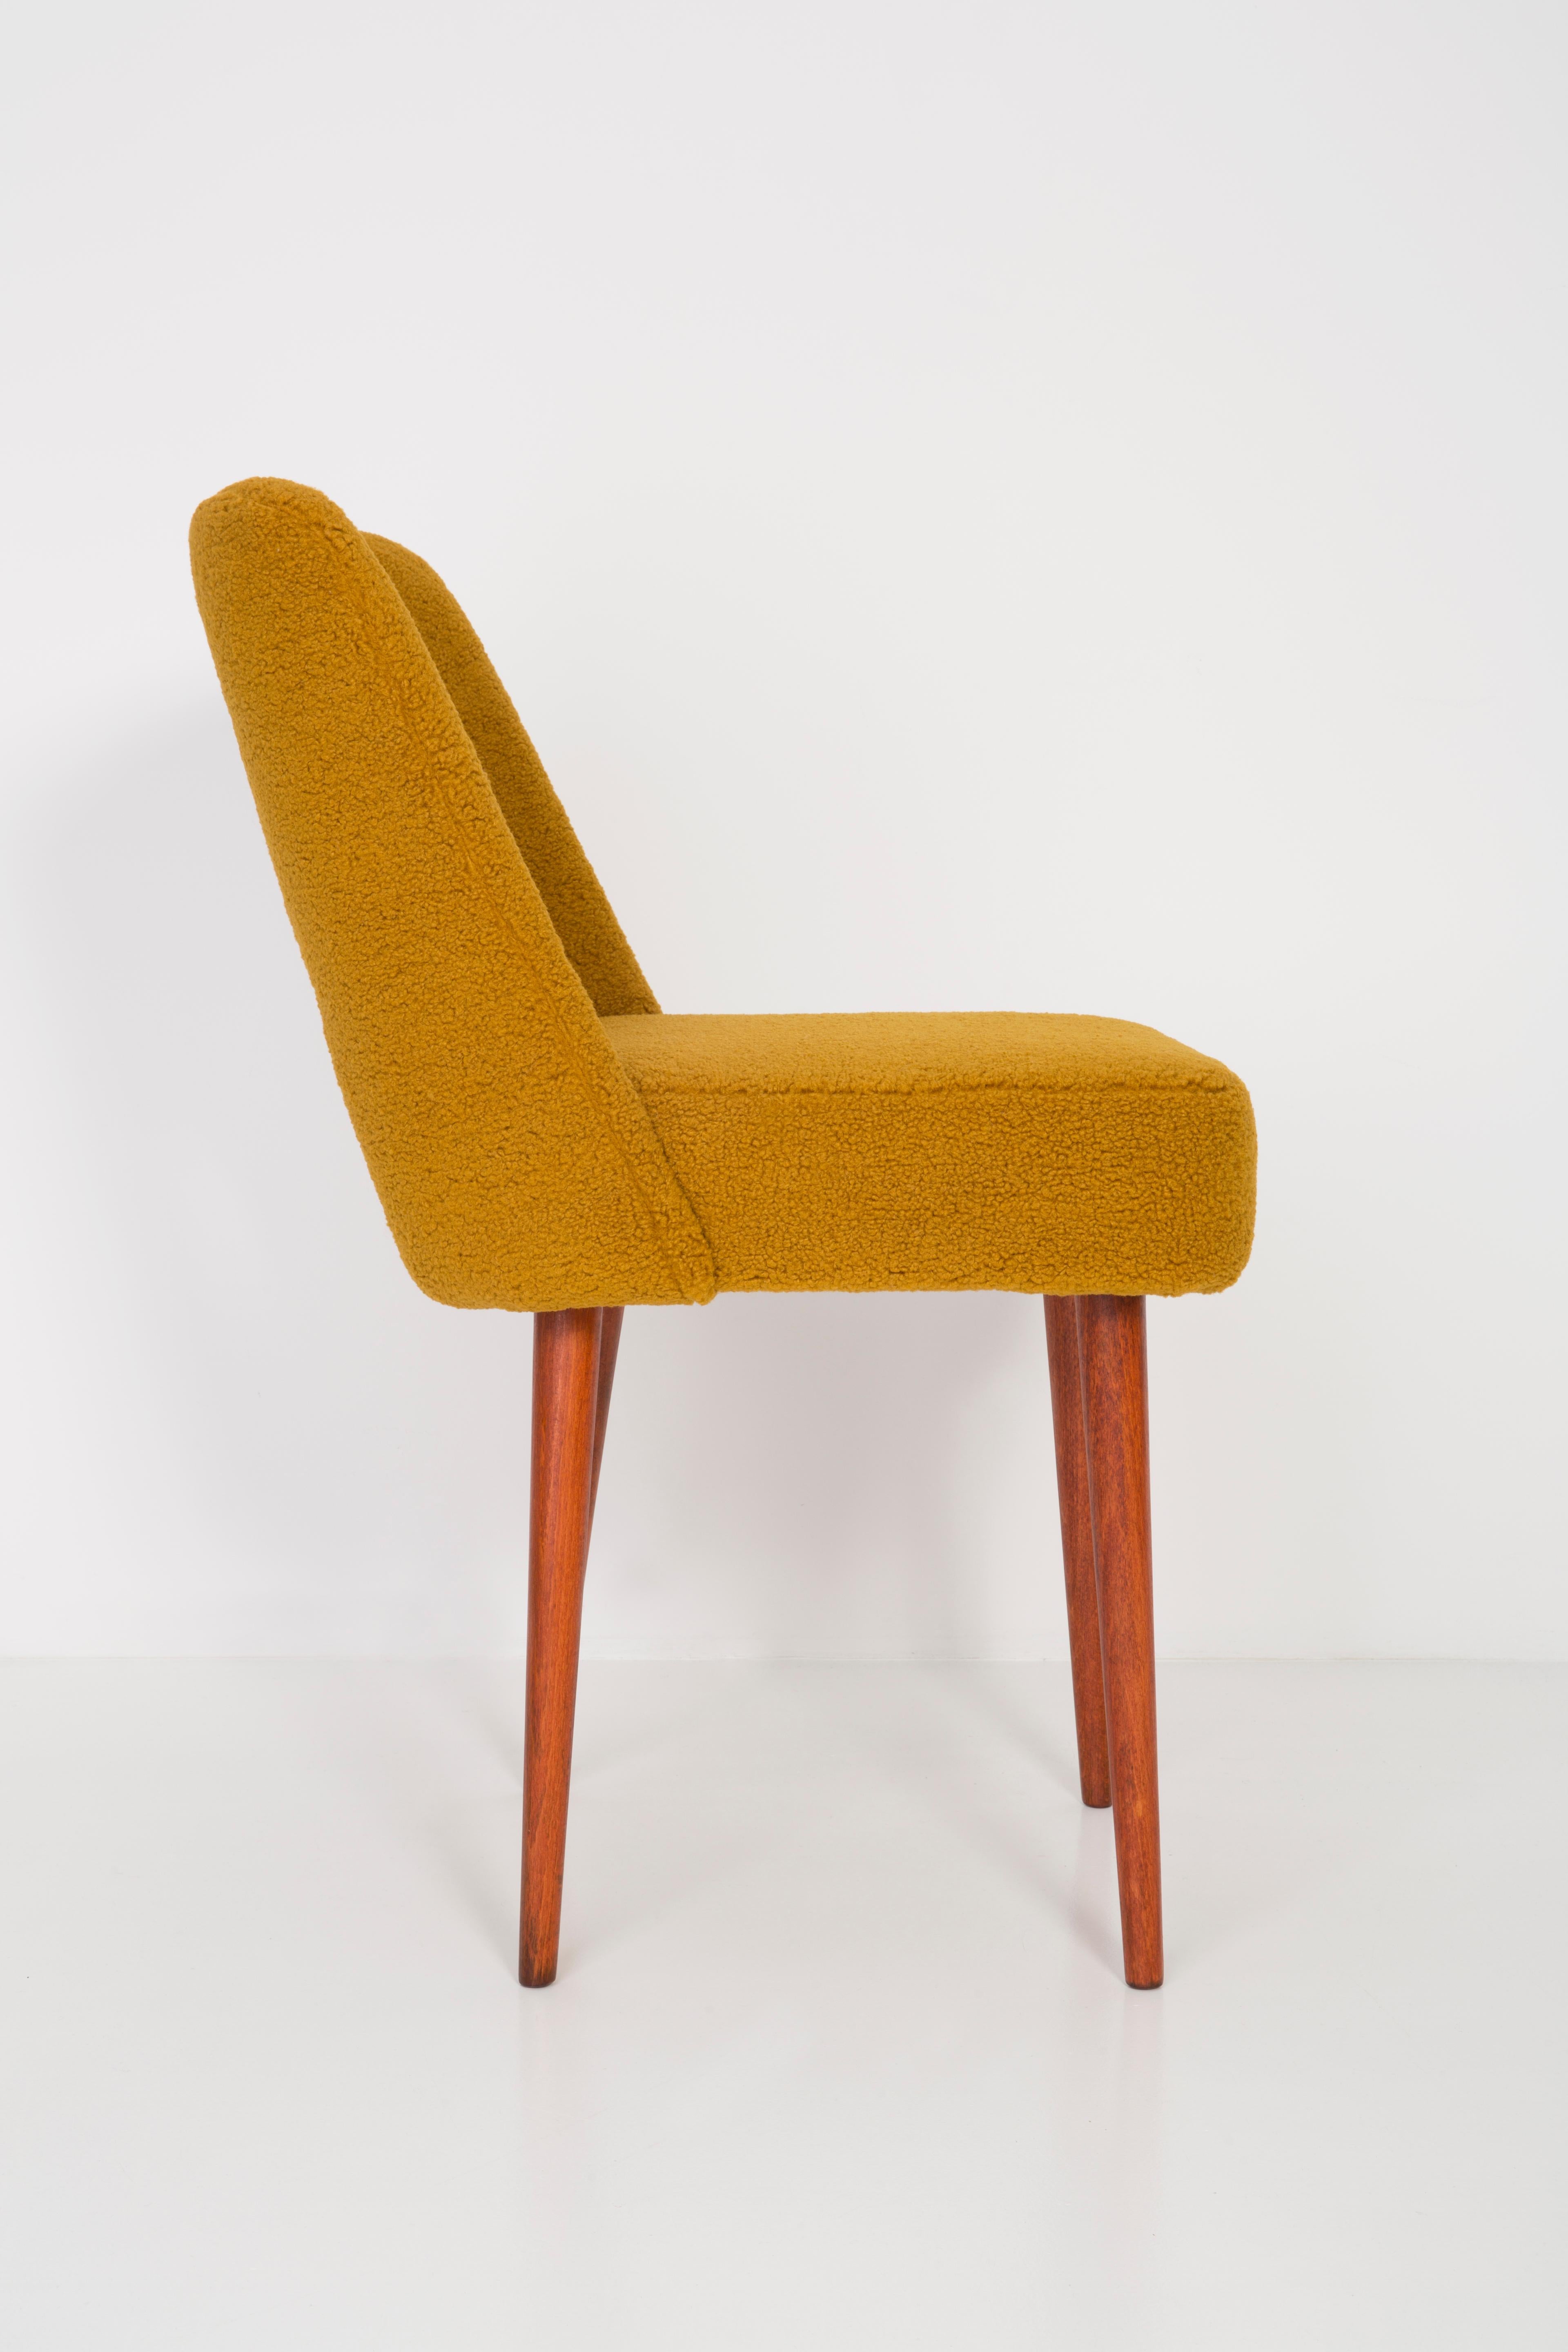 Set of Twelve Yellow Ochre Boucle 'Shell' Chairs, 1960s For Sale 3